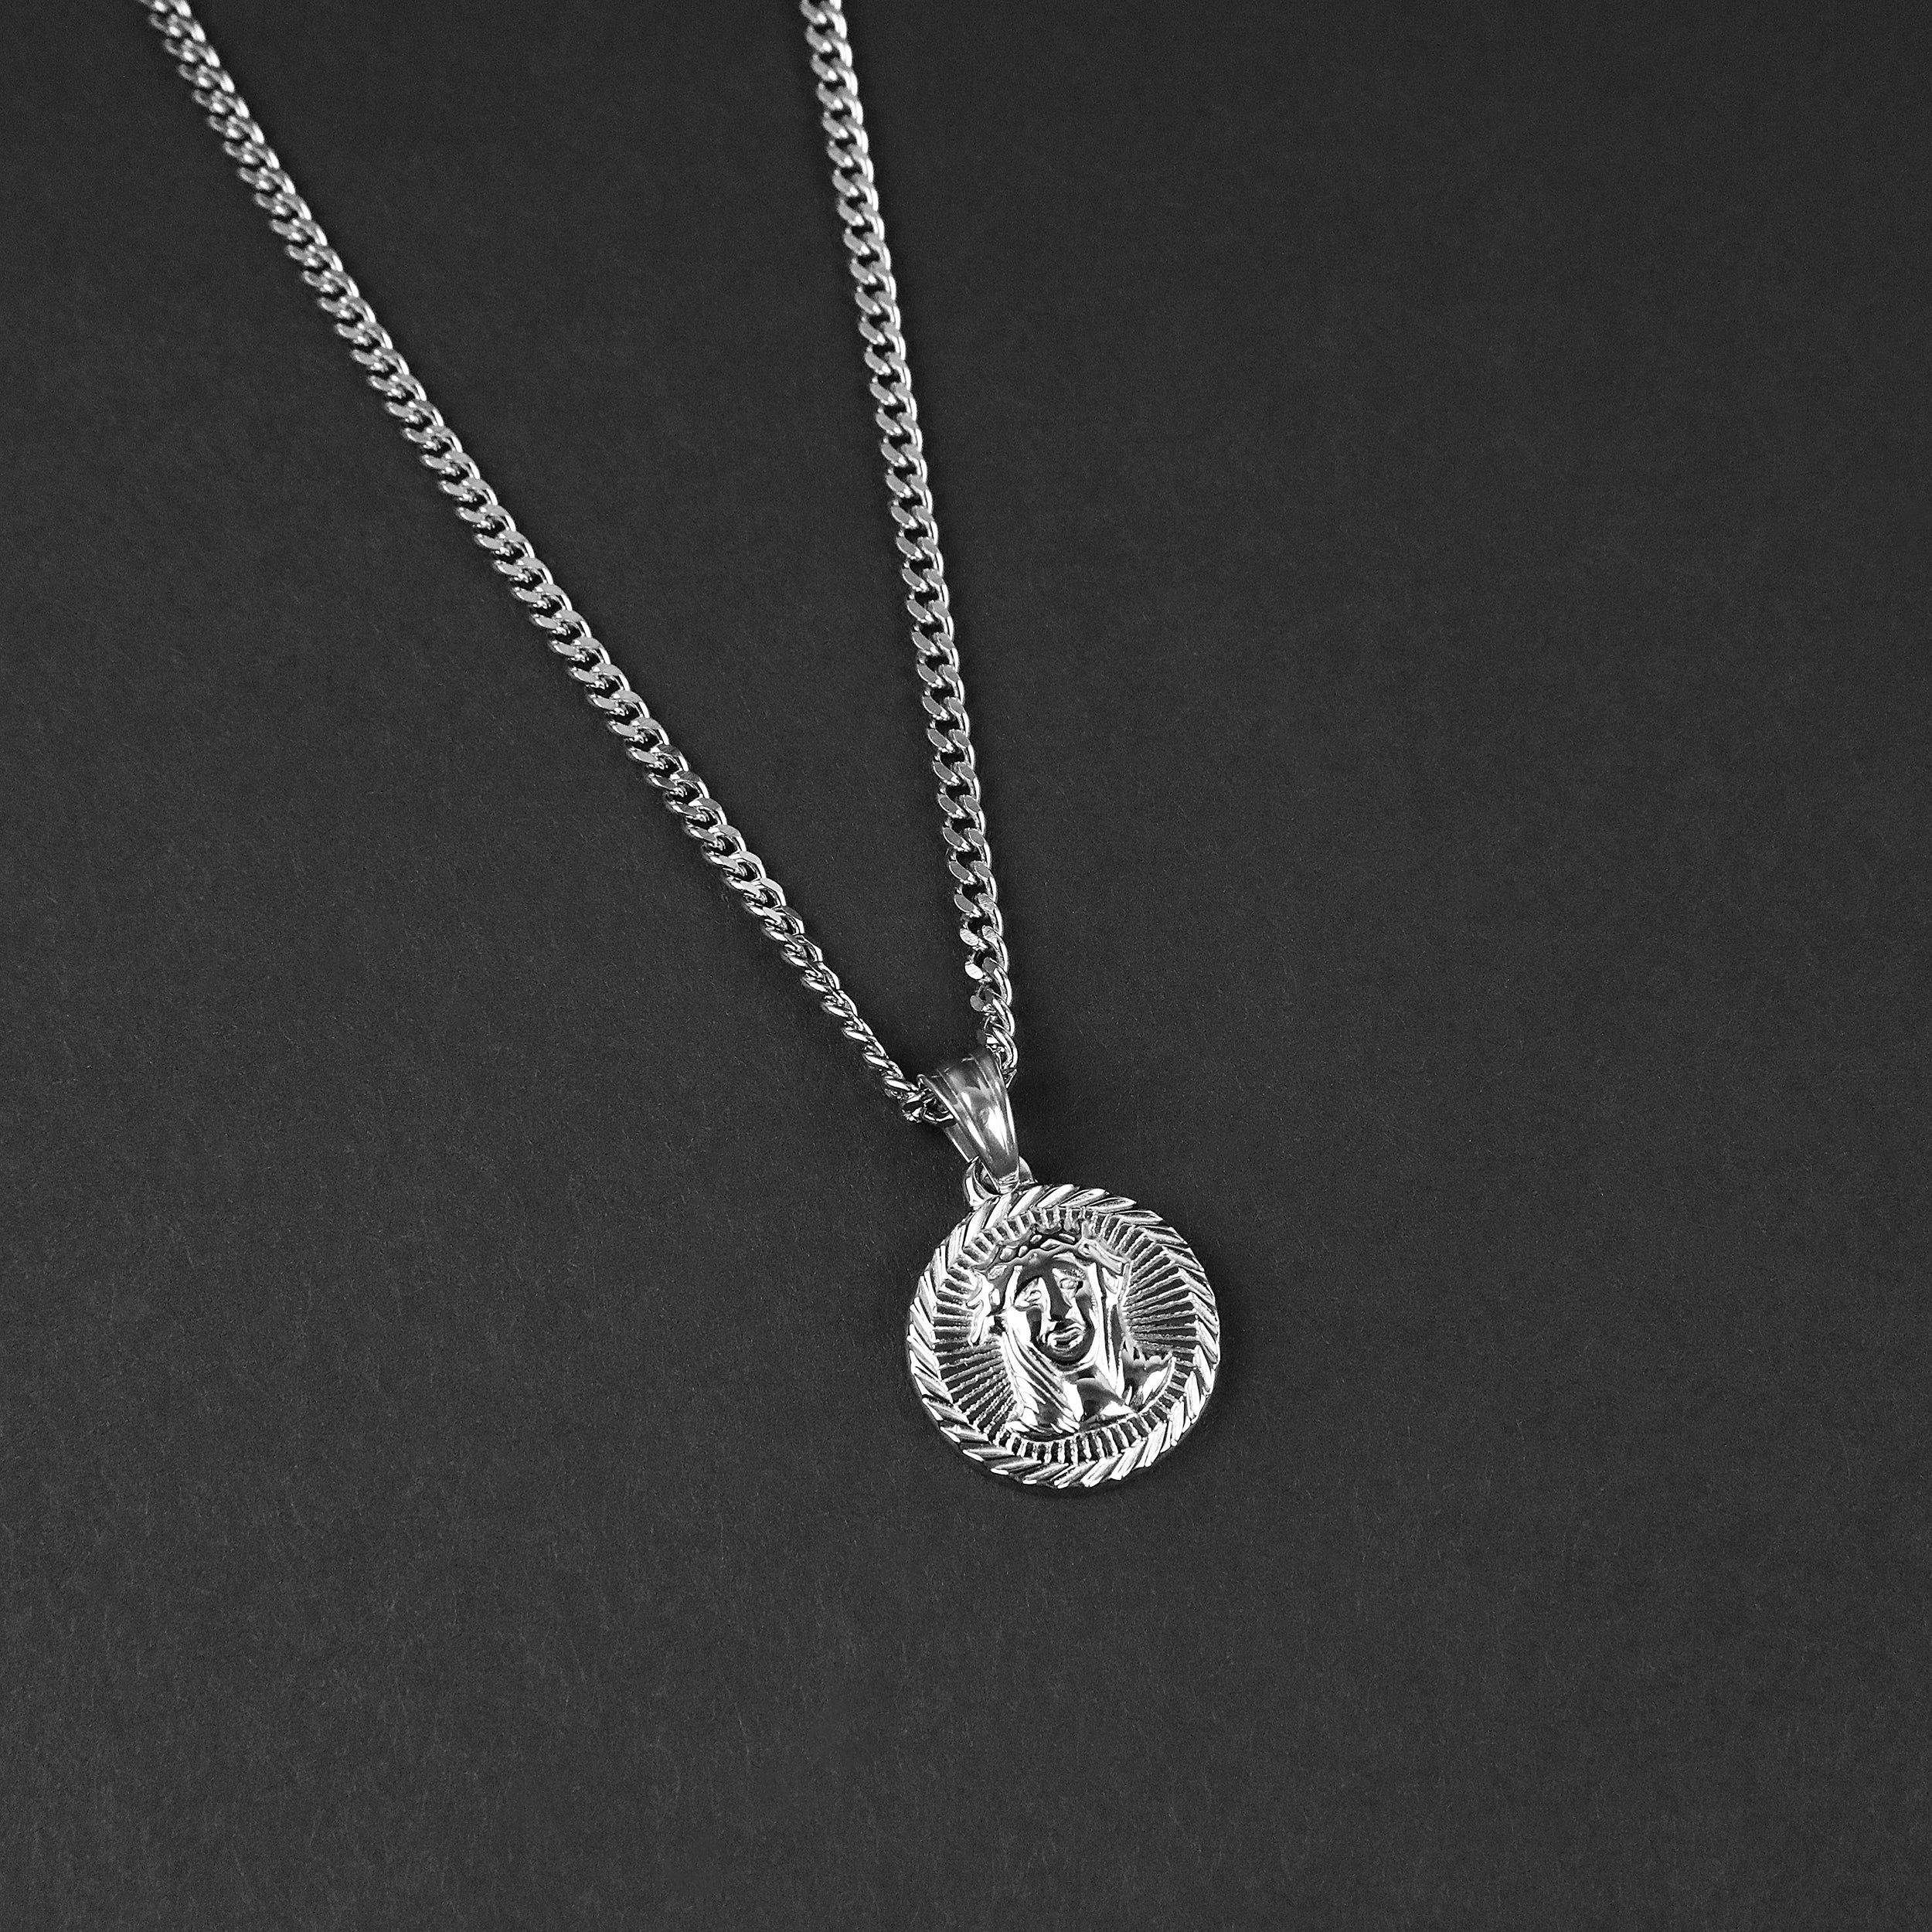 Almighty Amulet Necklace - Silver